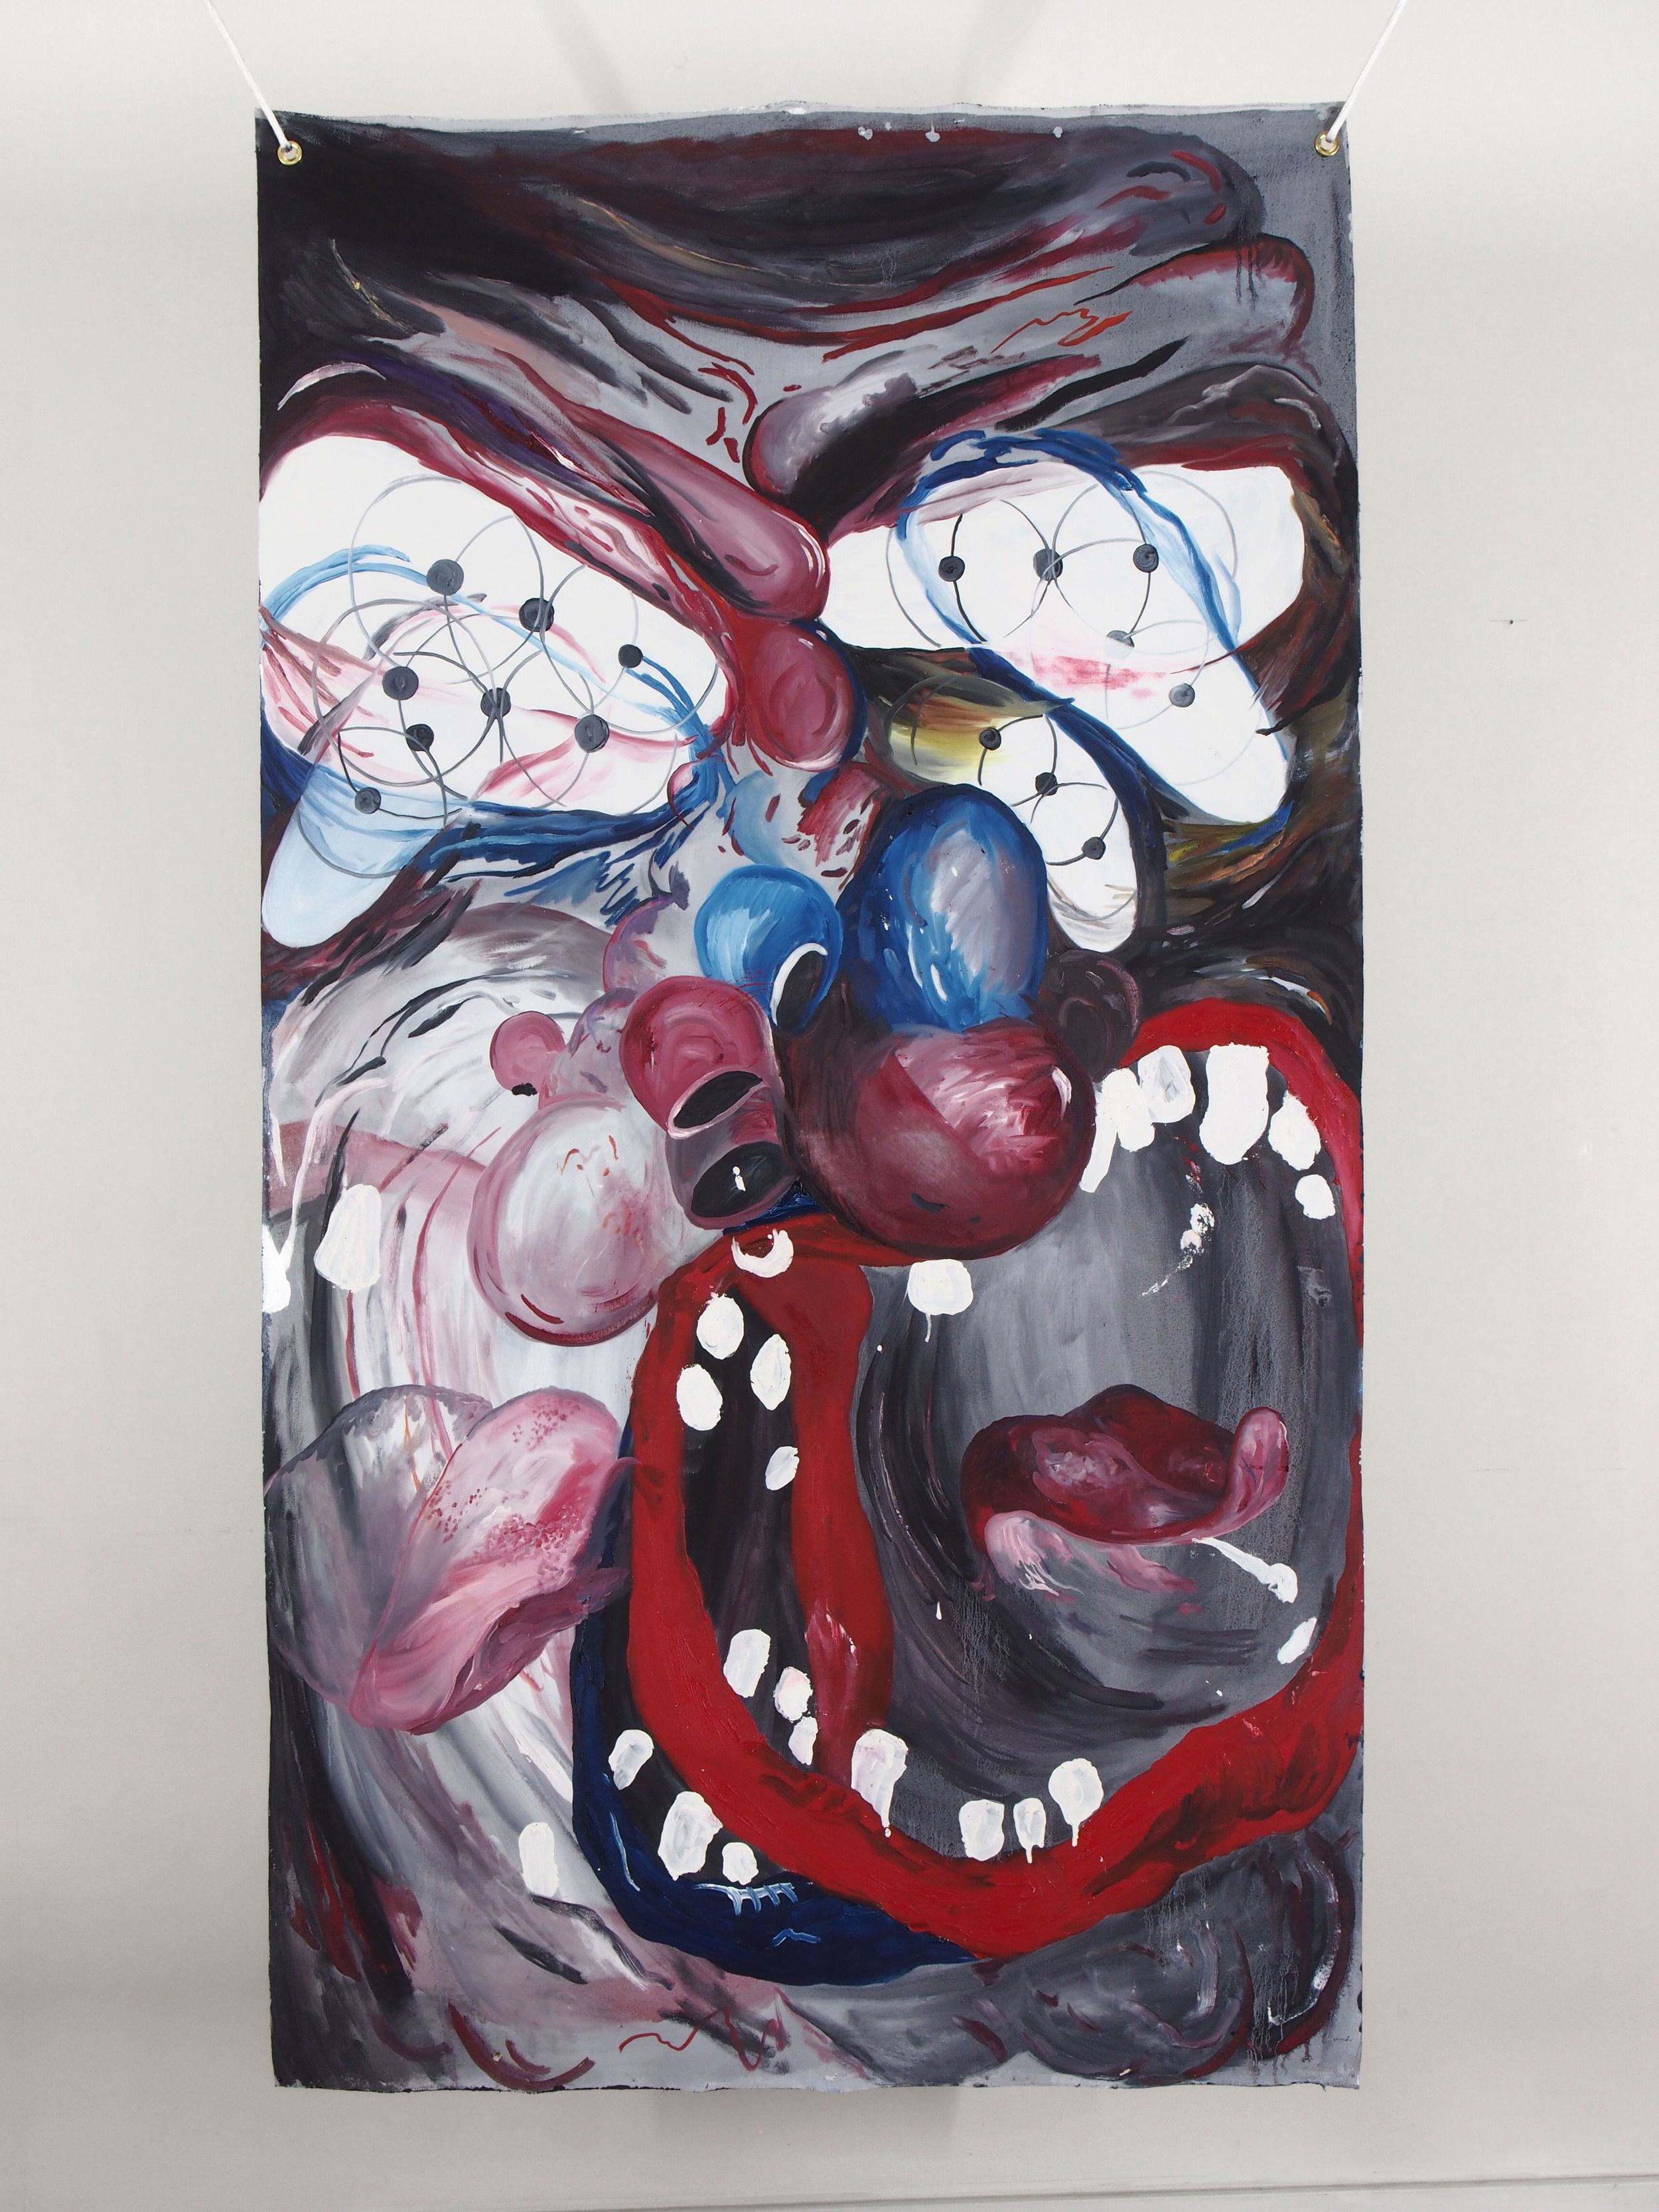  Morgan Mandalay  Screamer 1 , 2018 Oil paint on double-sided canvas 70 x 36 inches 